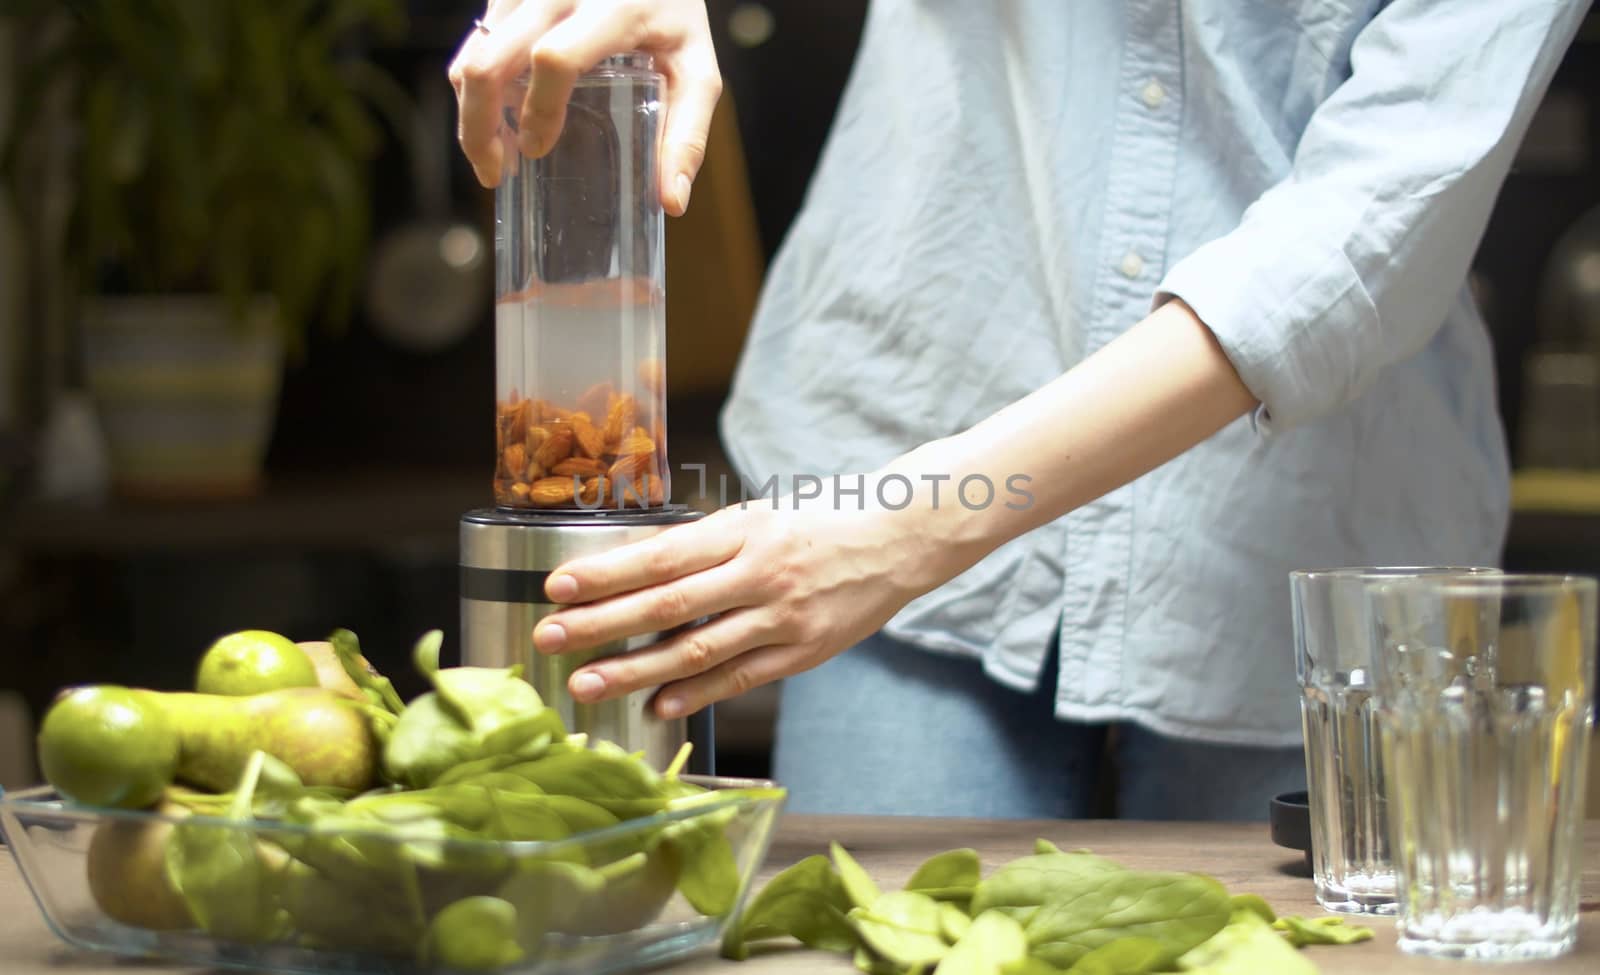 Cooking of almond milk. Woman sets a blender glass on a blender and presses a button. Healthy eating concept